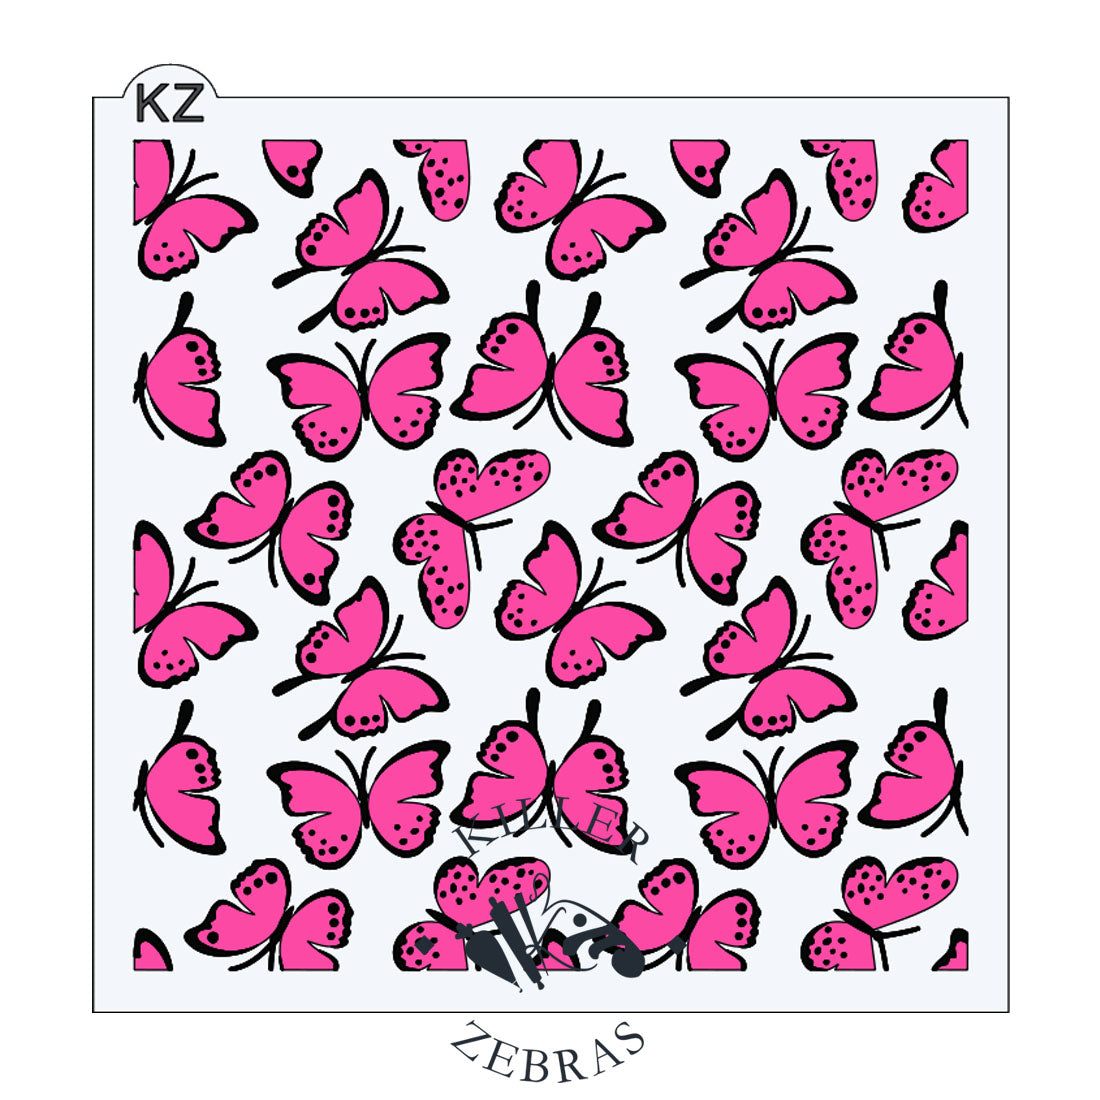 Large, square stencil with different hot pink and black butterflies filling the square.